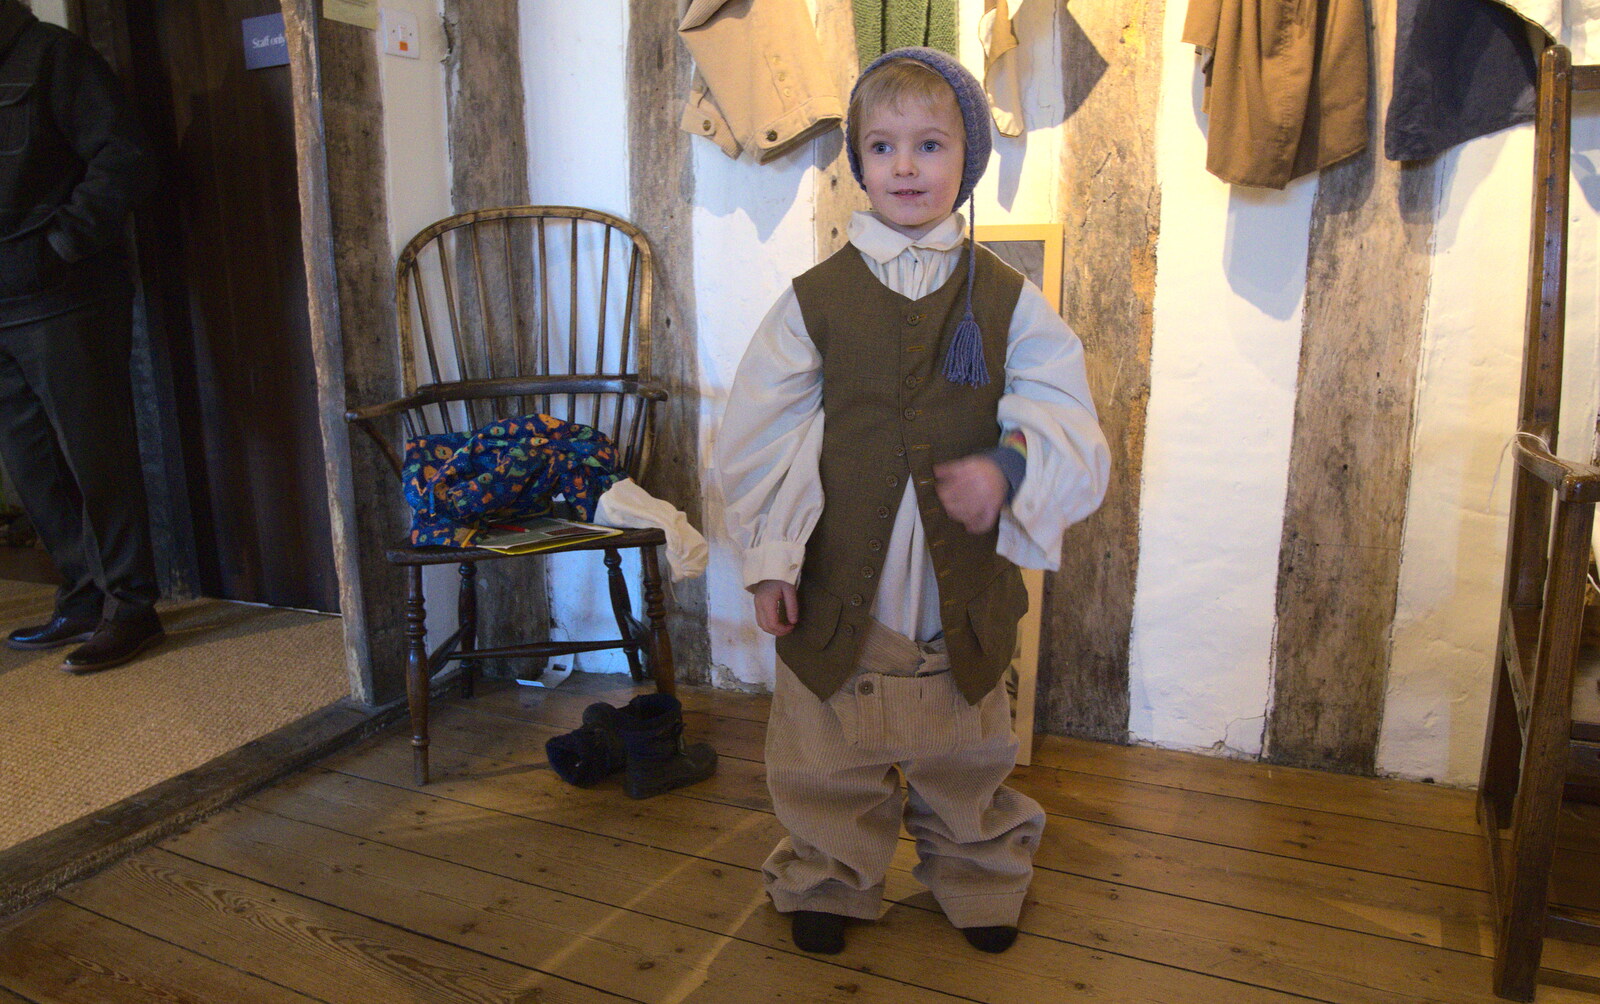 Harry dresses up in period gear from A Day in Lavenham, Suffolk - 22nd January 2017